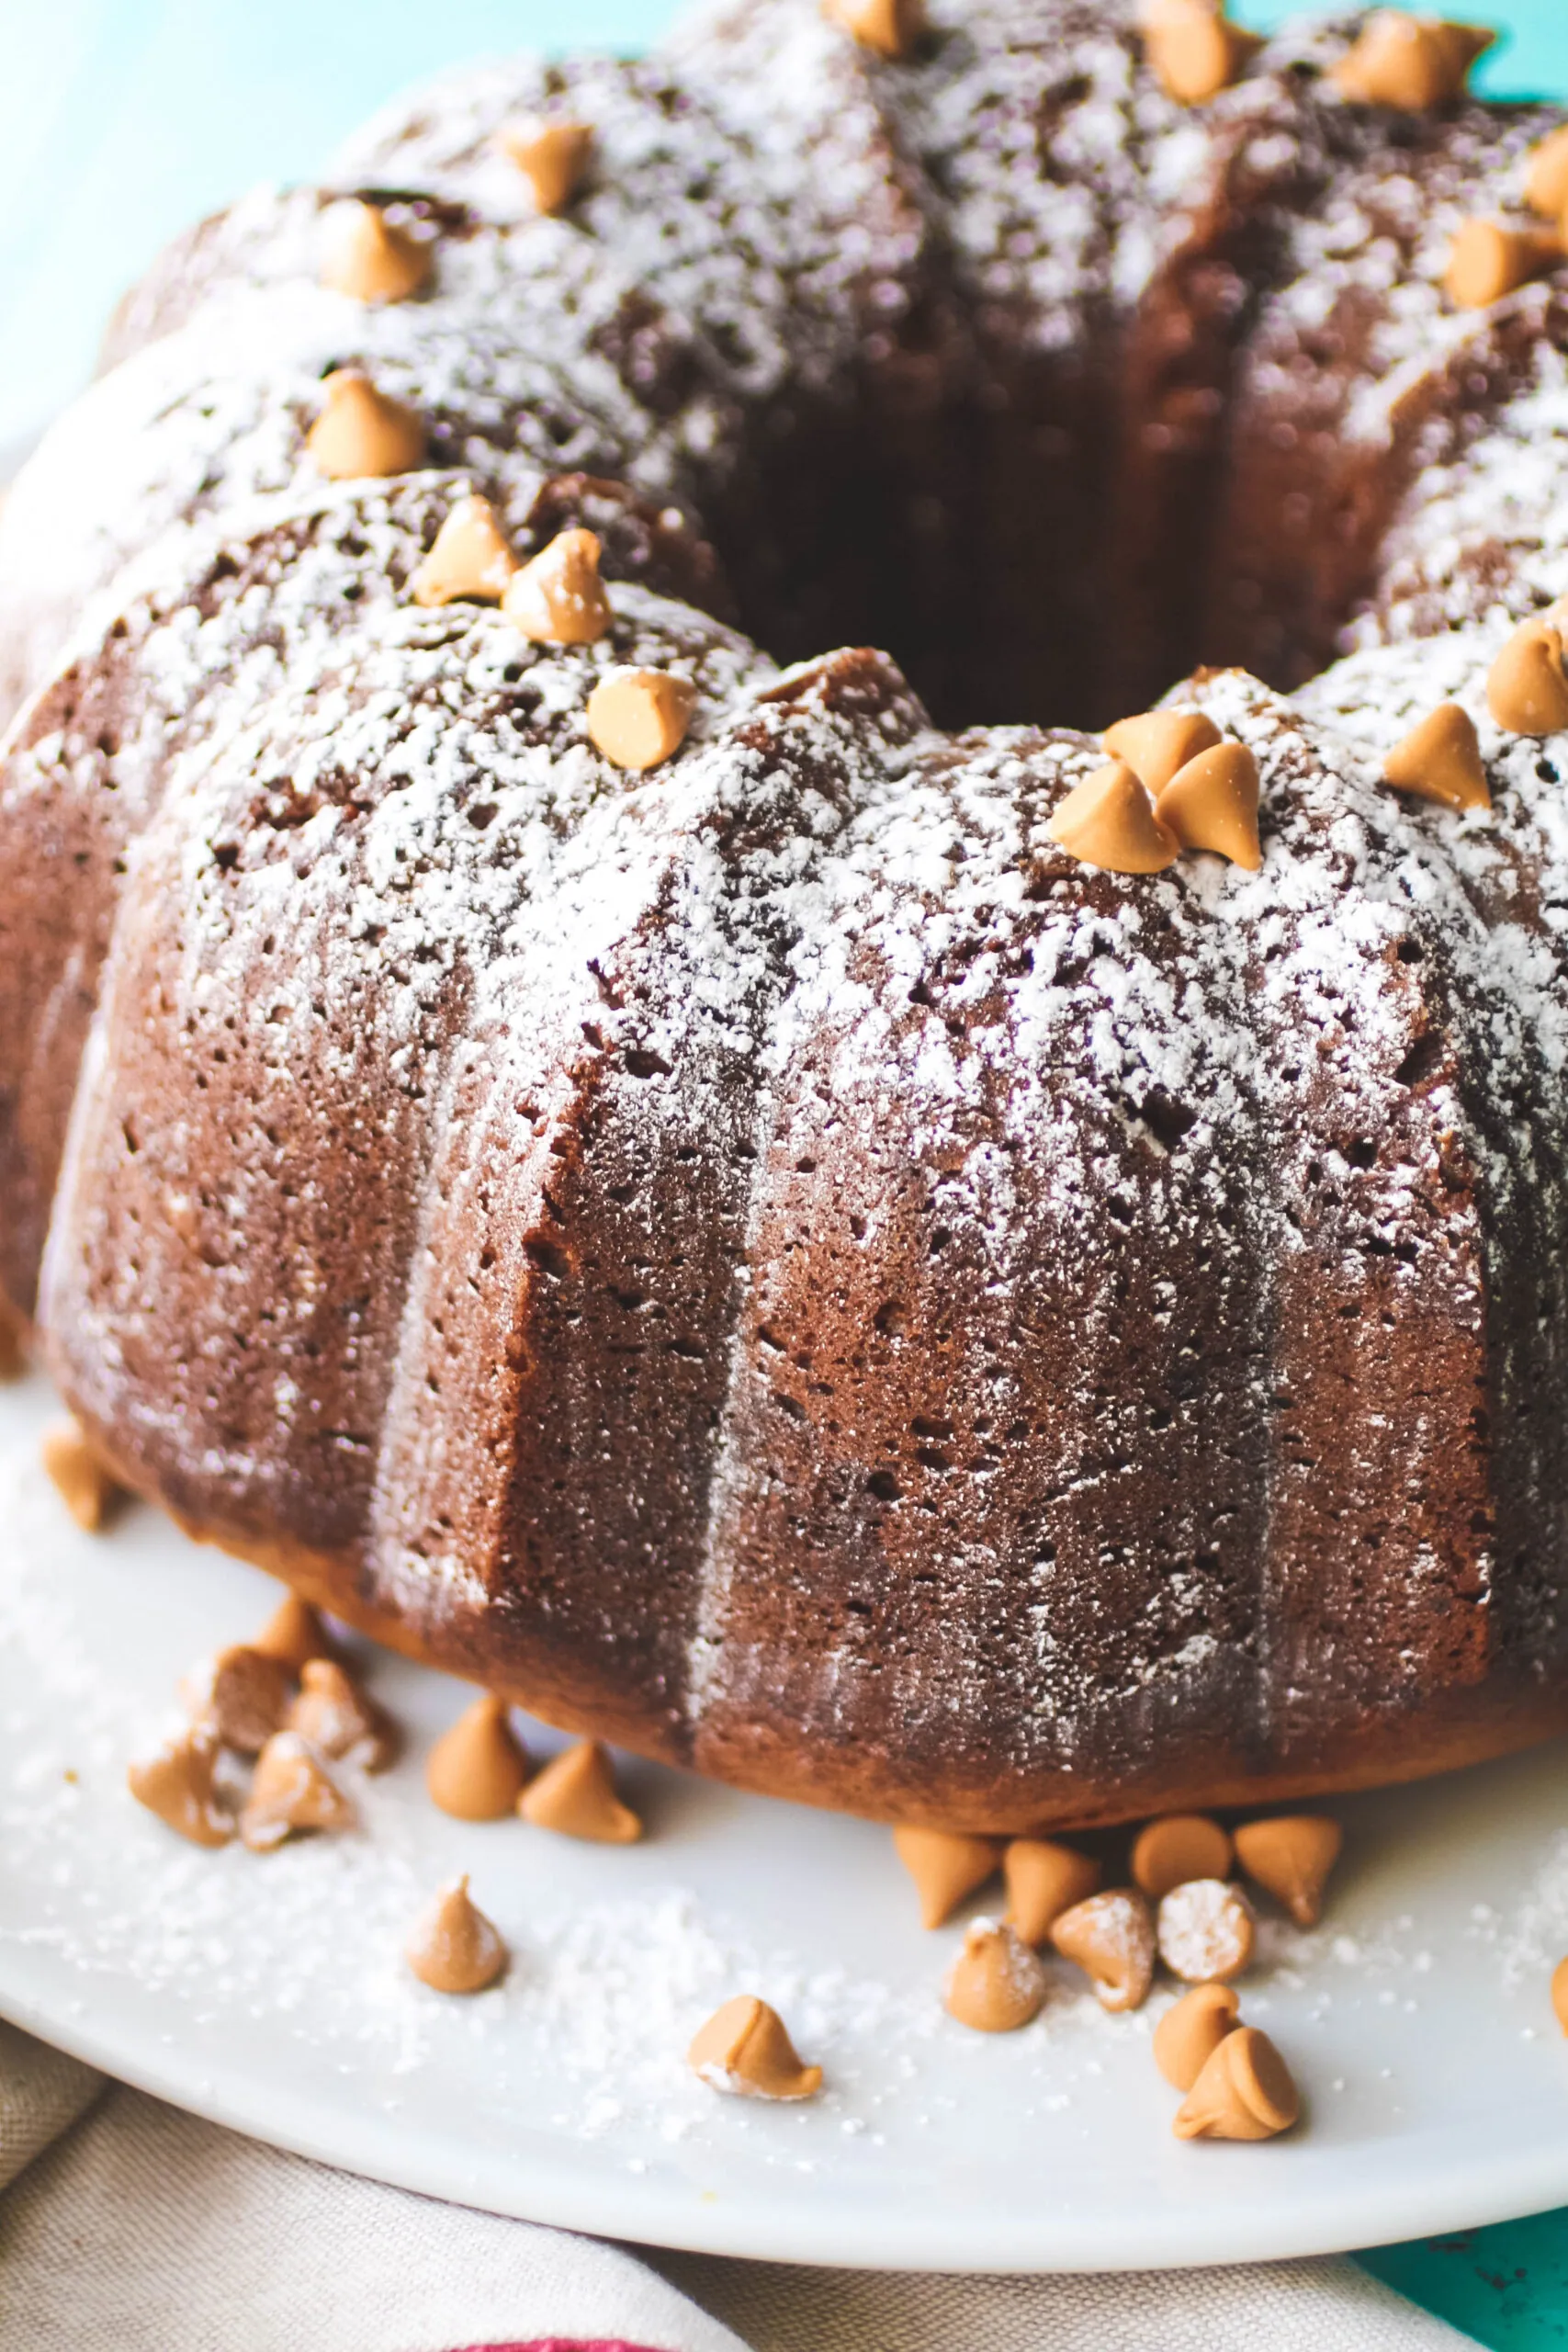 A Banana-Butterscotch Bundt Cake on a platter means a tasty dessert is nearby! Give this delightful, flavorful Bundt cake a try!